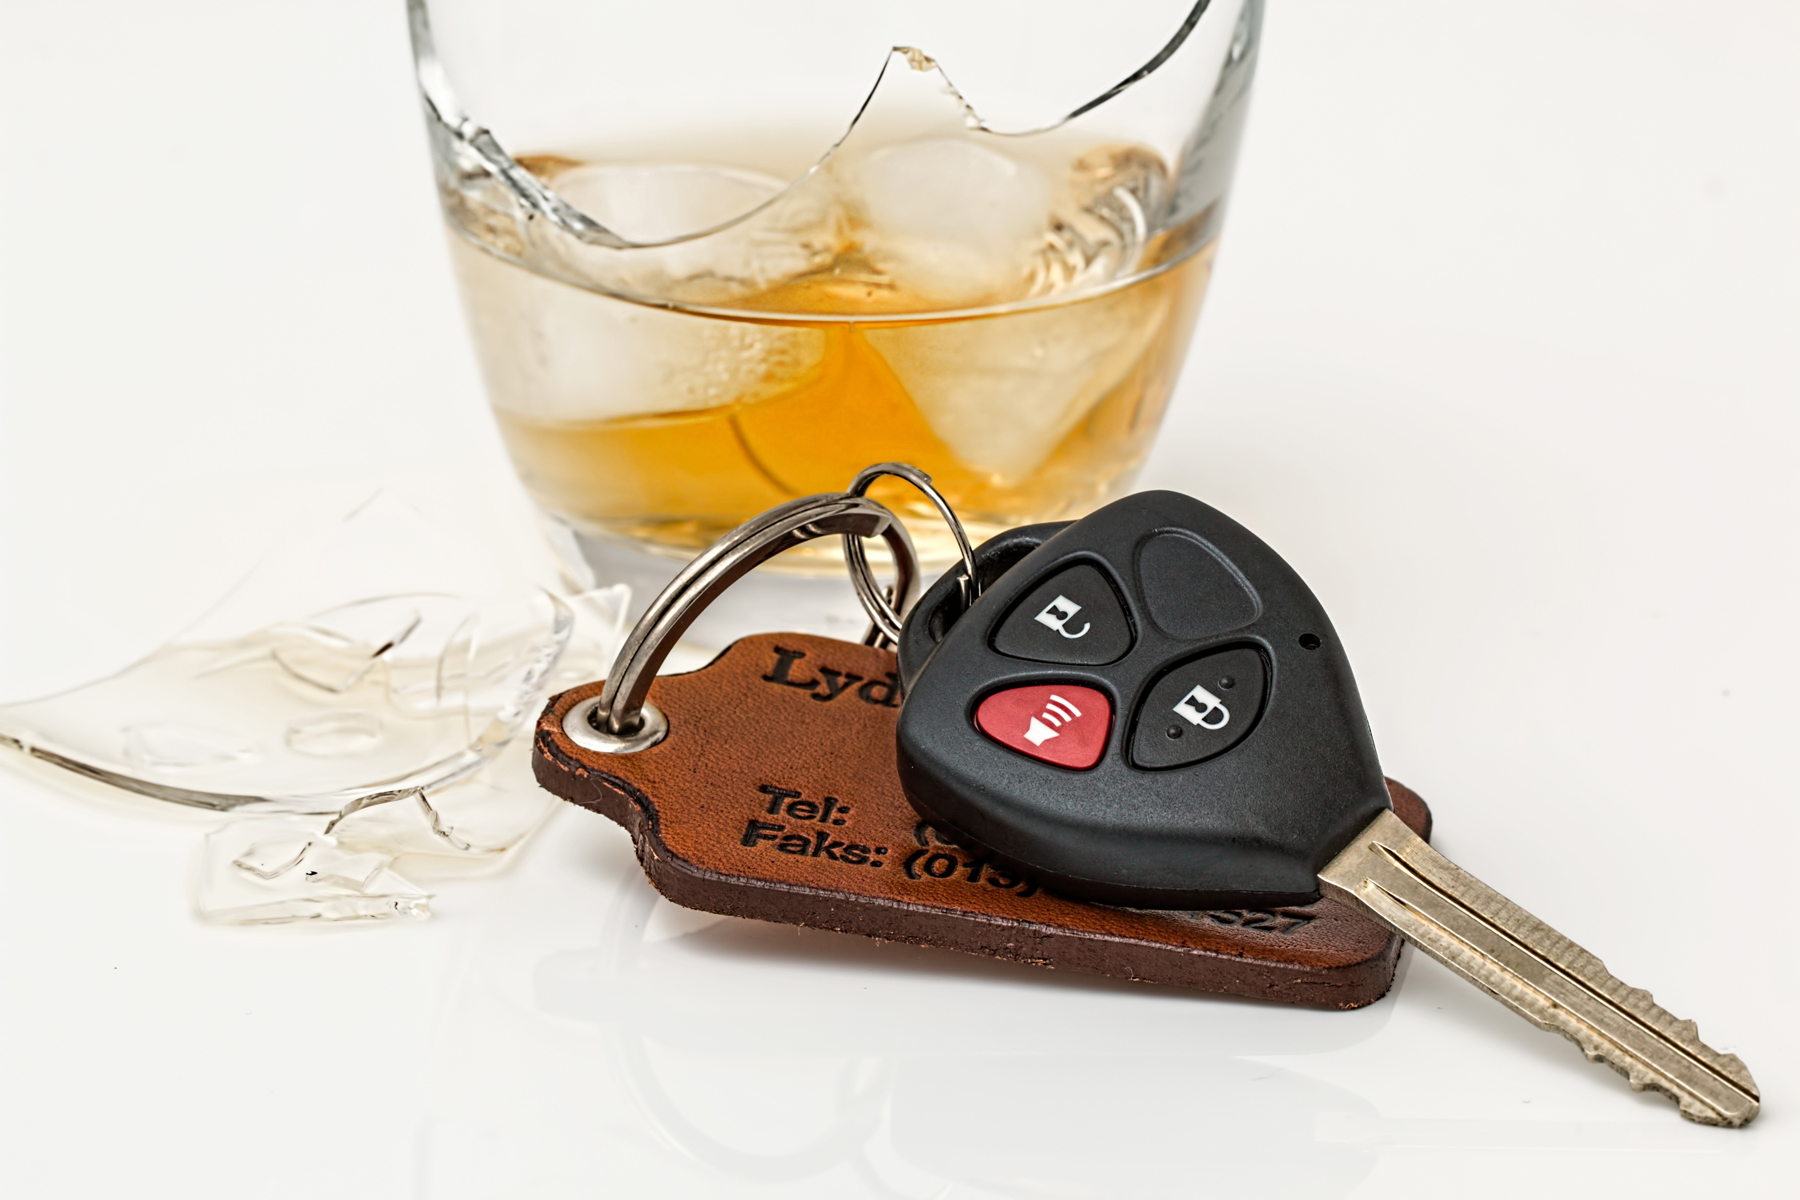 A broken glass of whiskey next to a set of car keys